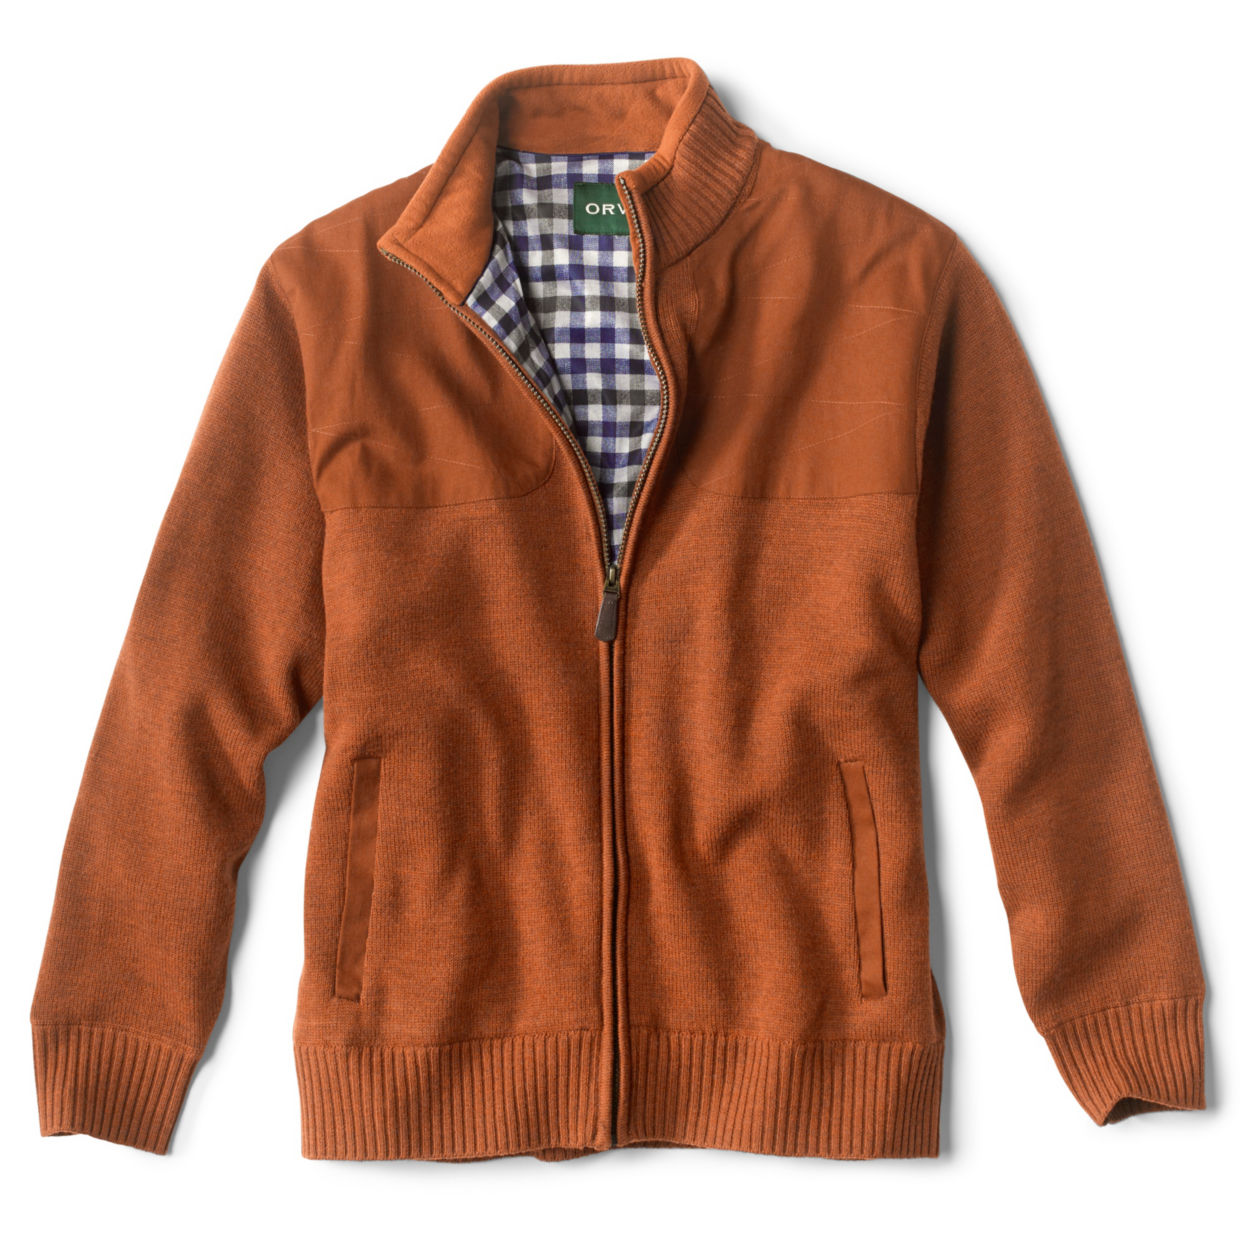 Men's Sweaters and Pullovers - Country / Outdoors Clothing